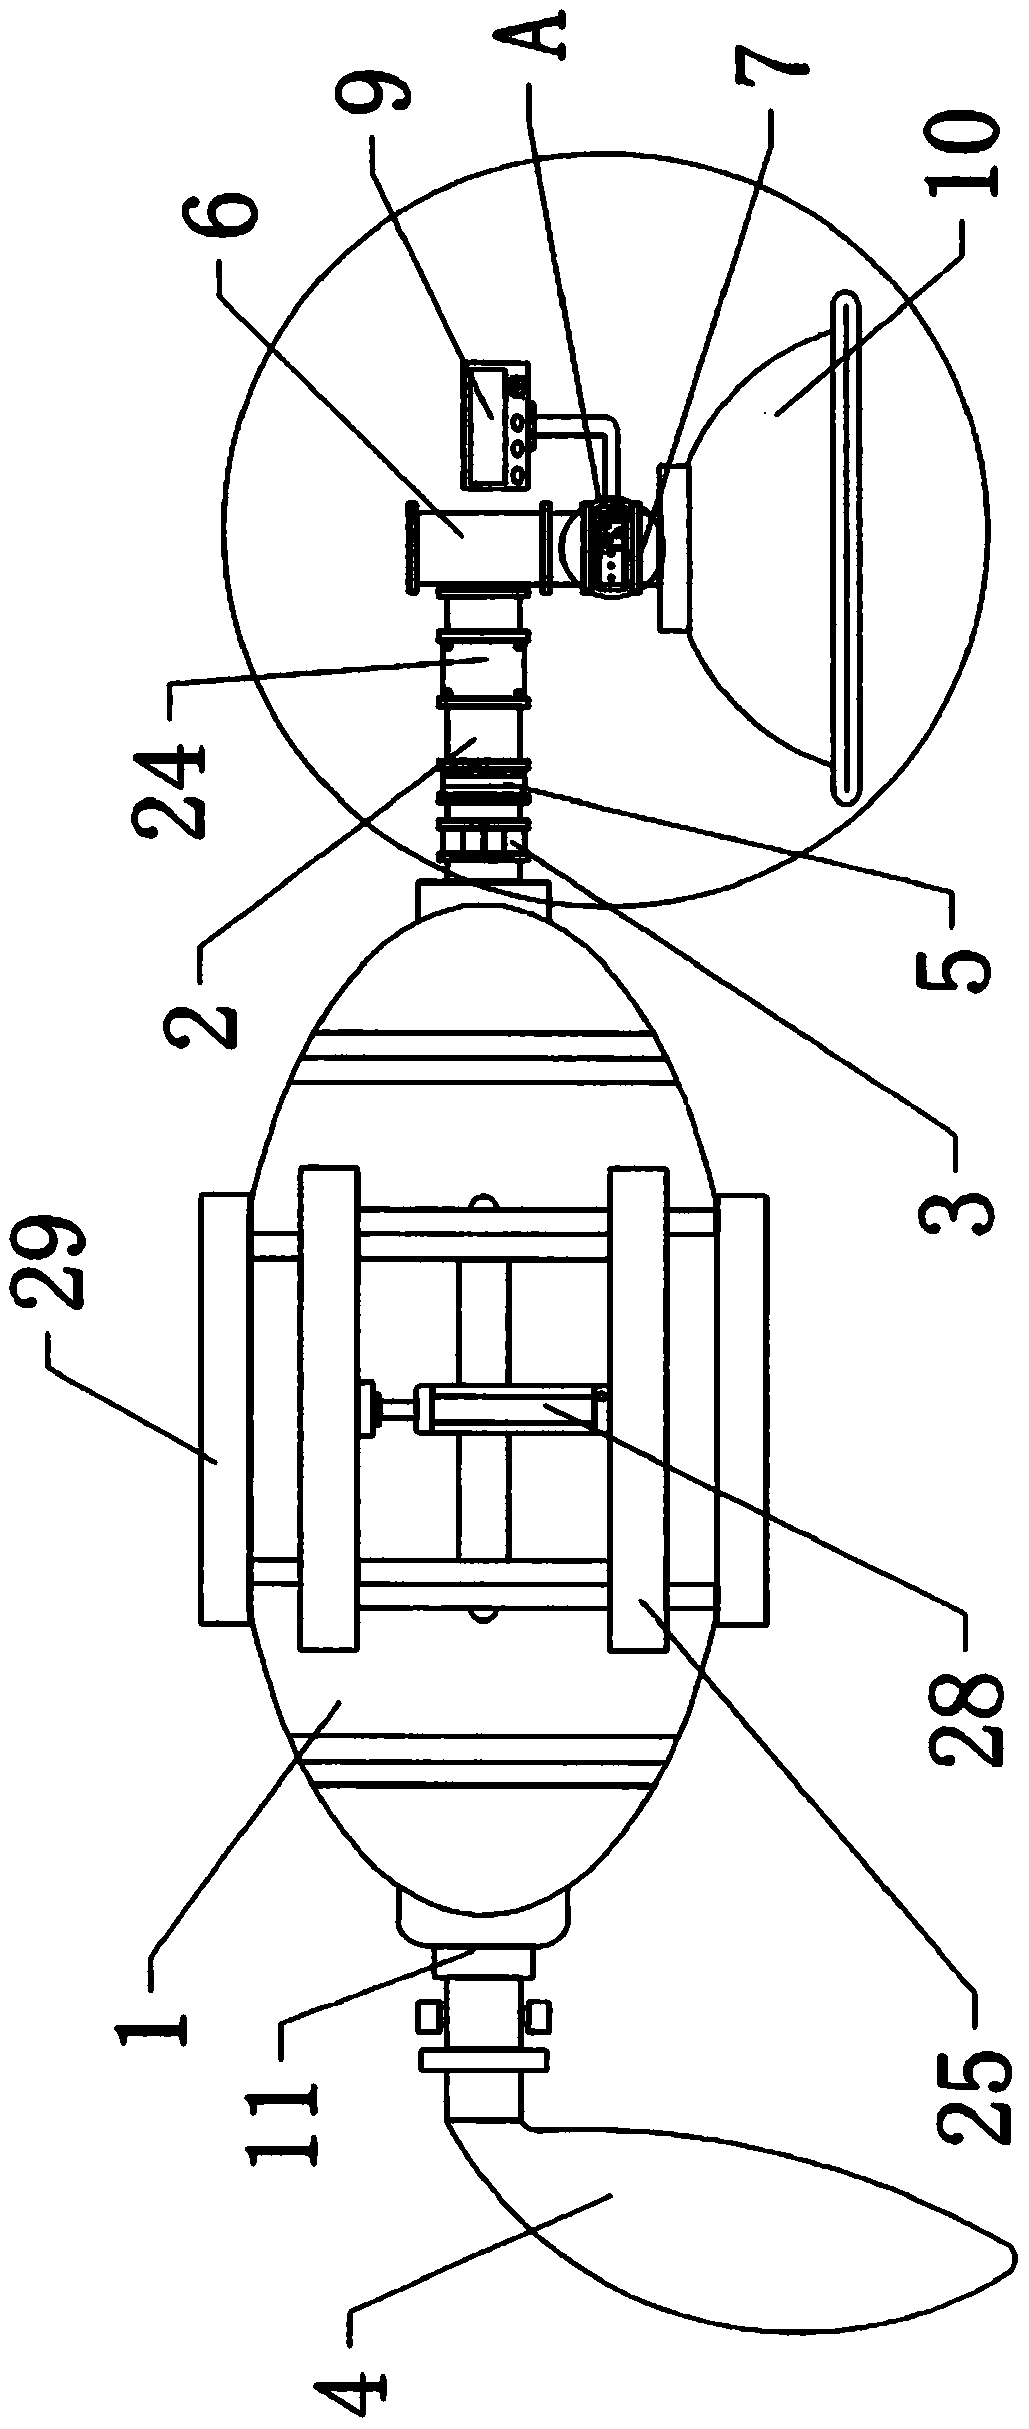 Respirator device capable of performing ventilation monitoring